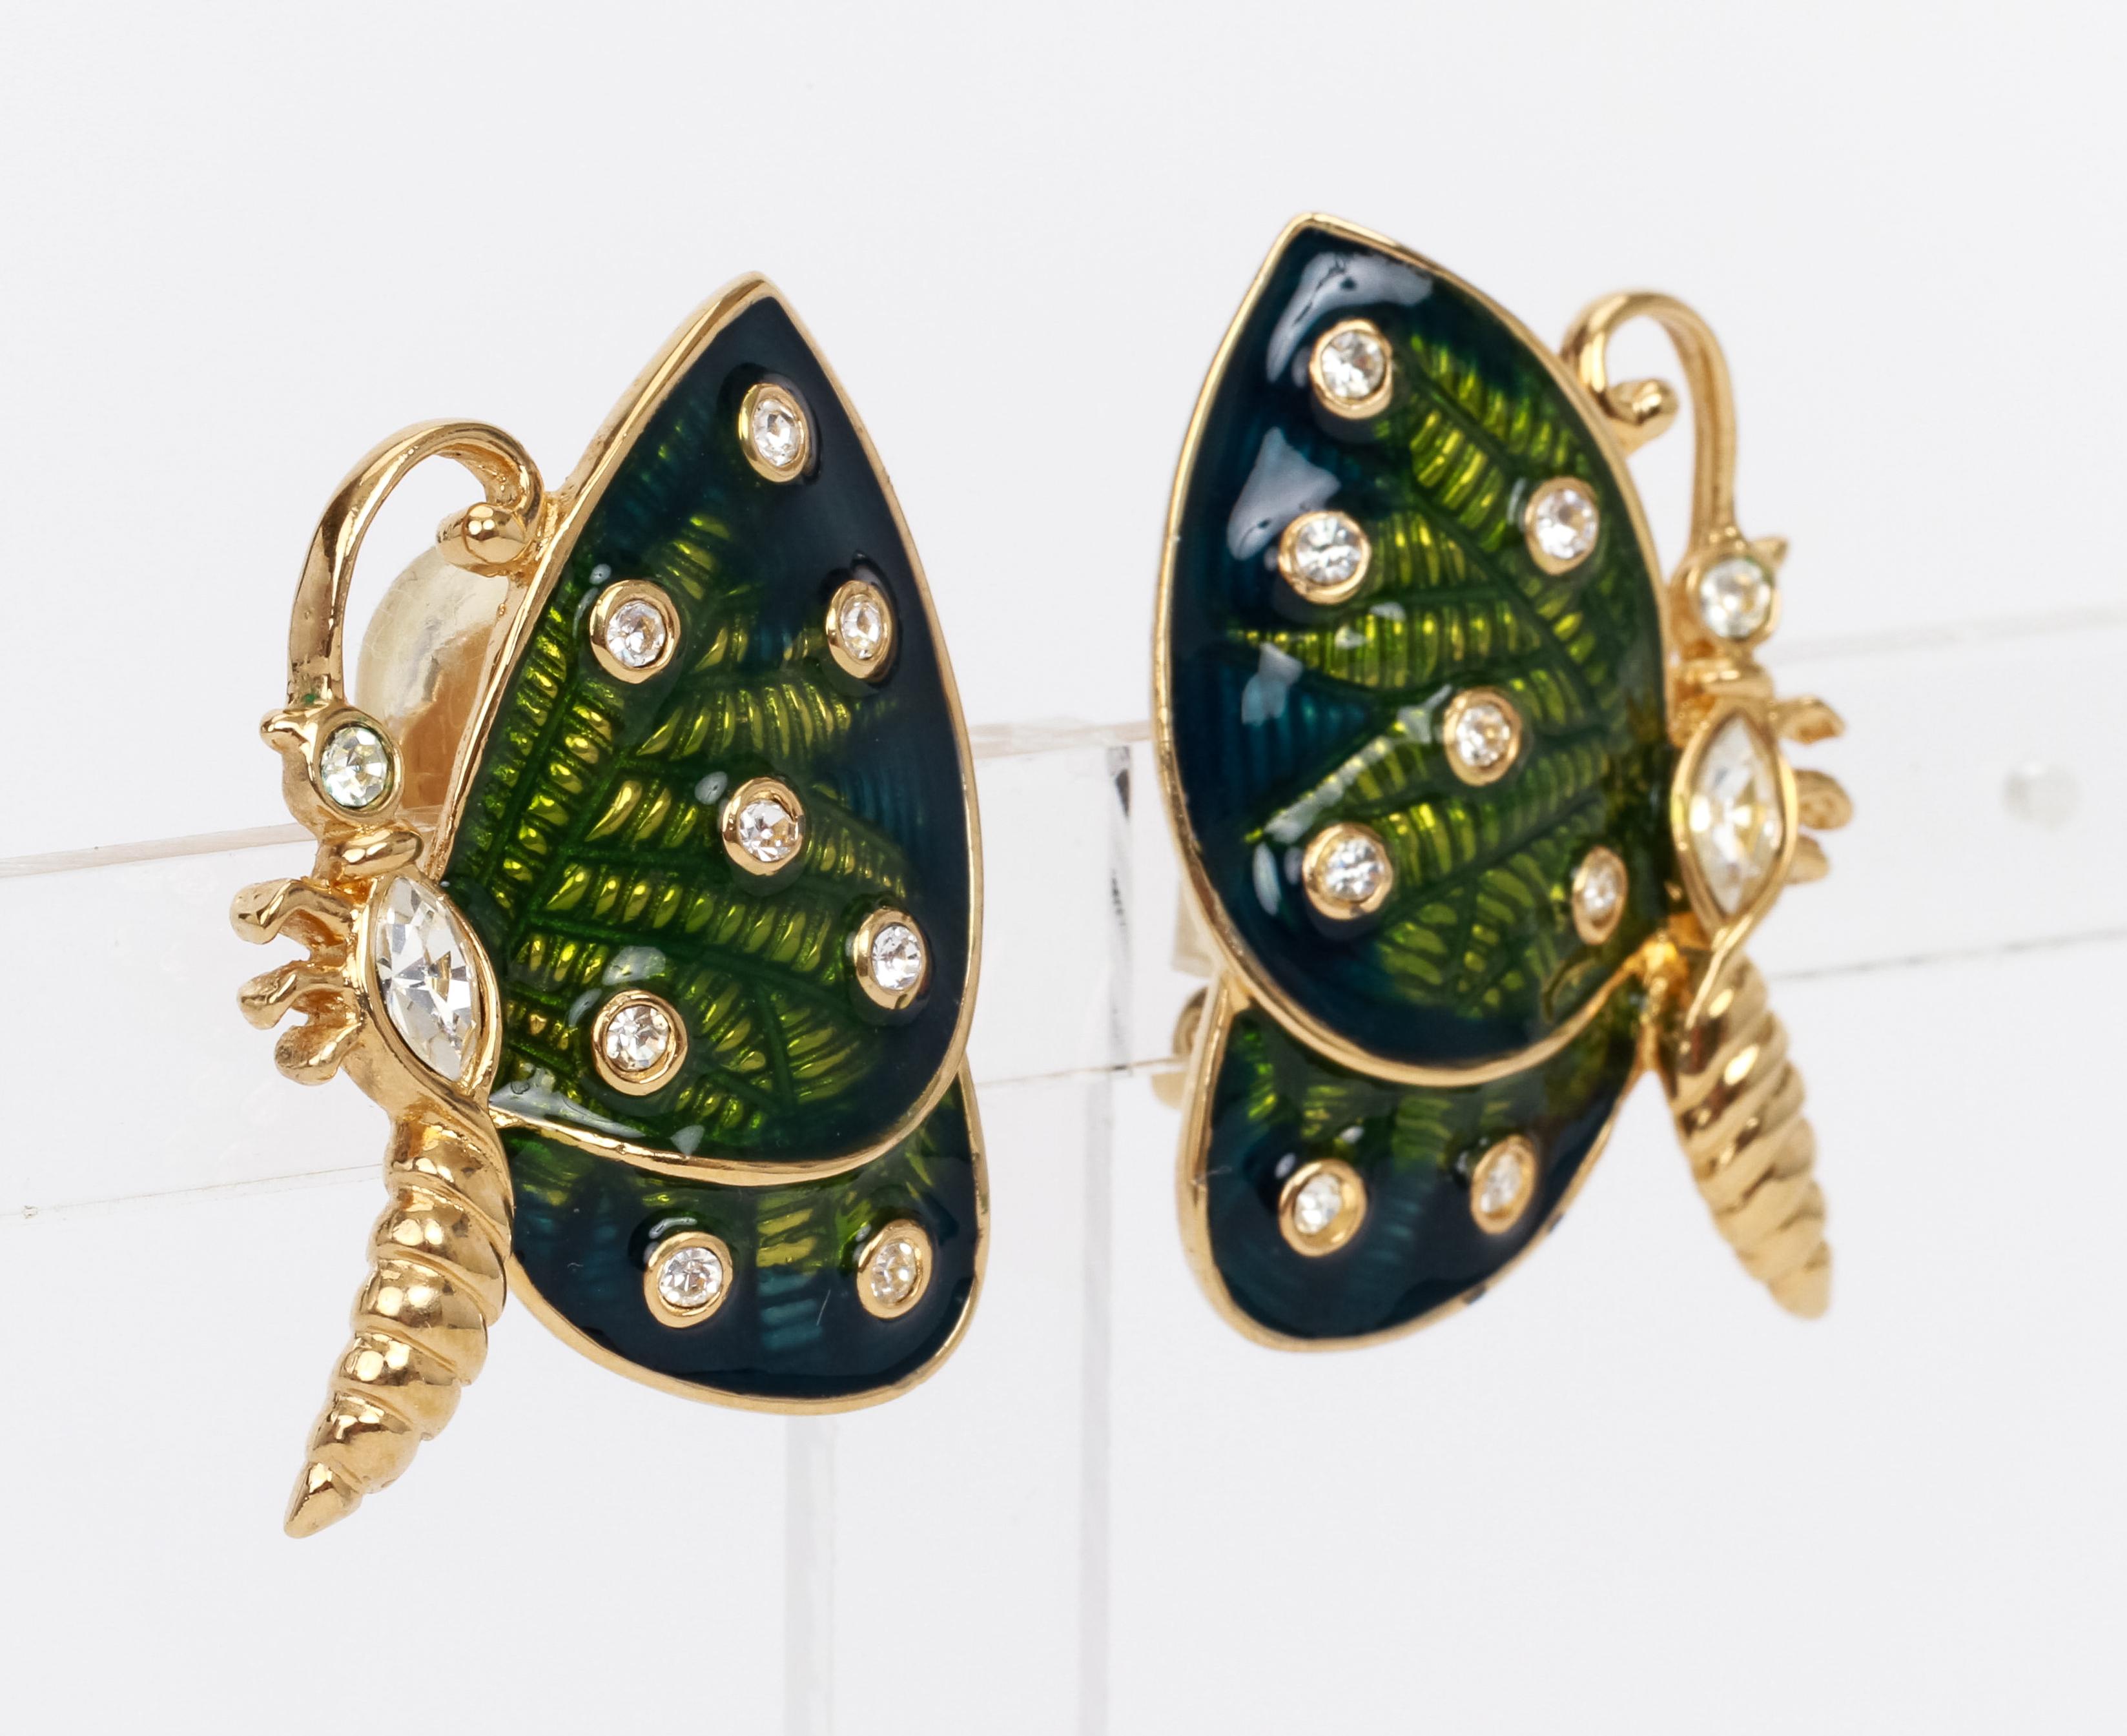 Judith Leiber enamel butterfly ear clips with green wings and rhinestones